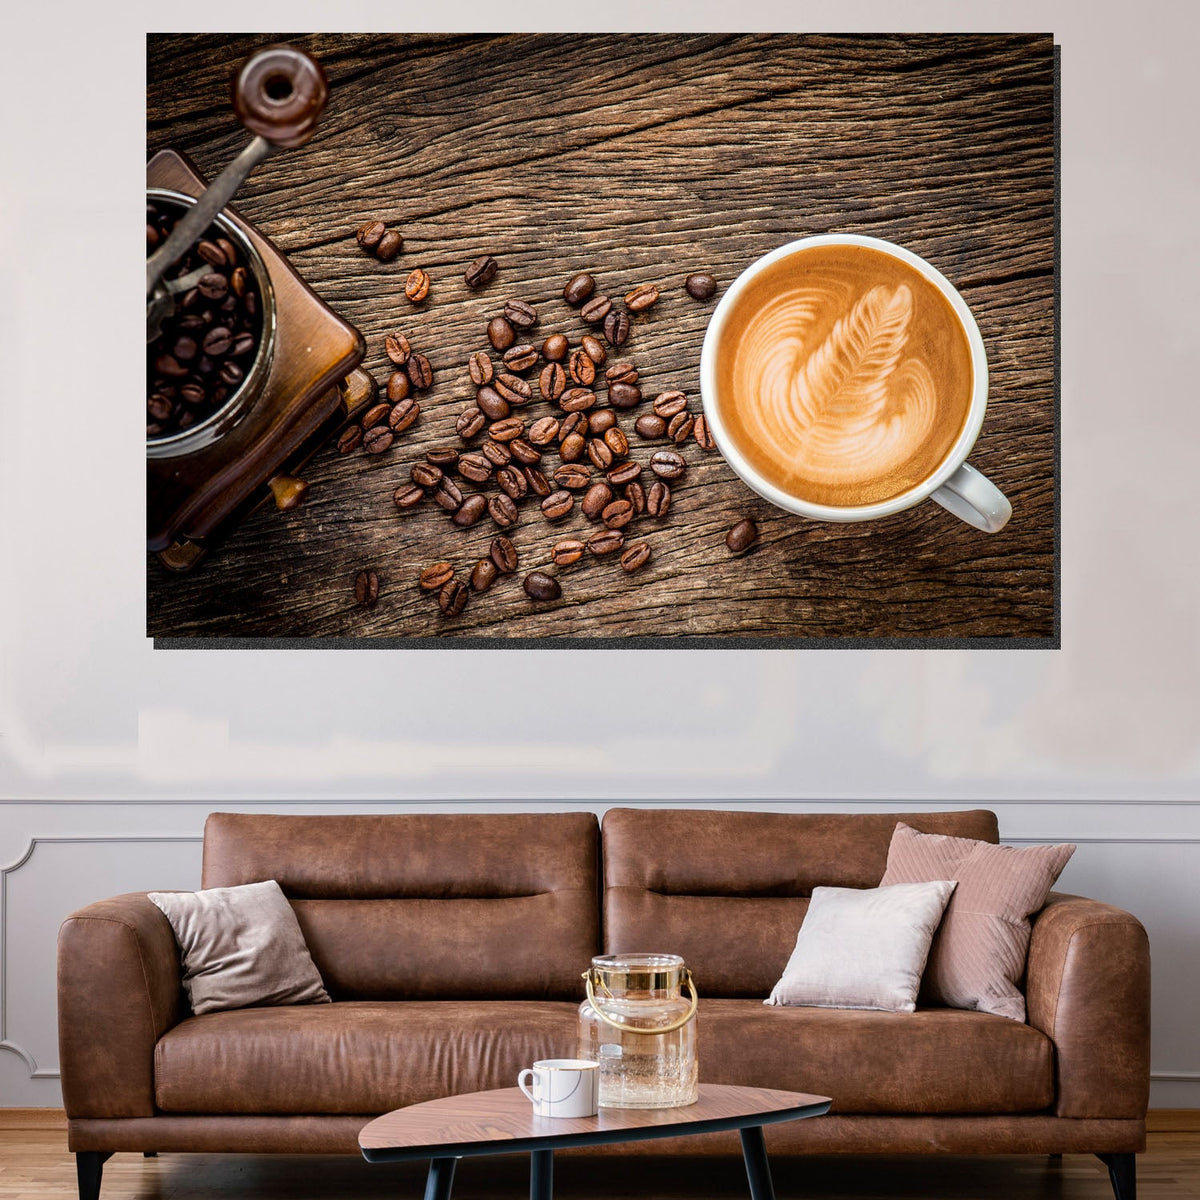 https://cdn.shopify.com/s/files/1/0387/9986/8044/products/CoffeeDecadenceCanvasArtprintStretched-2.jpg